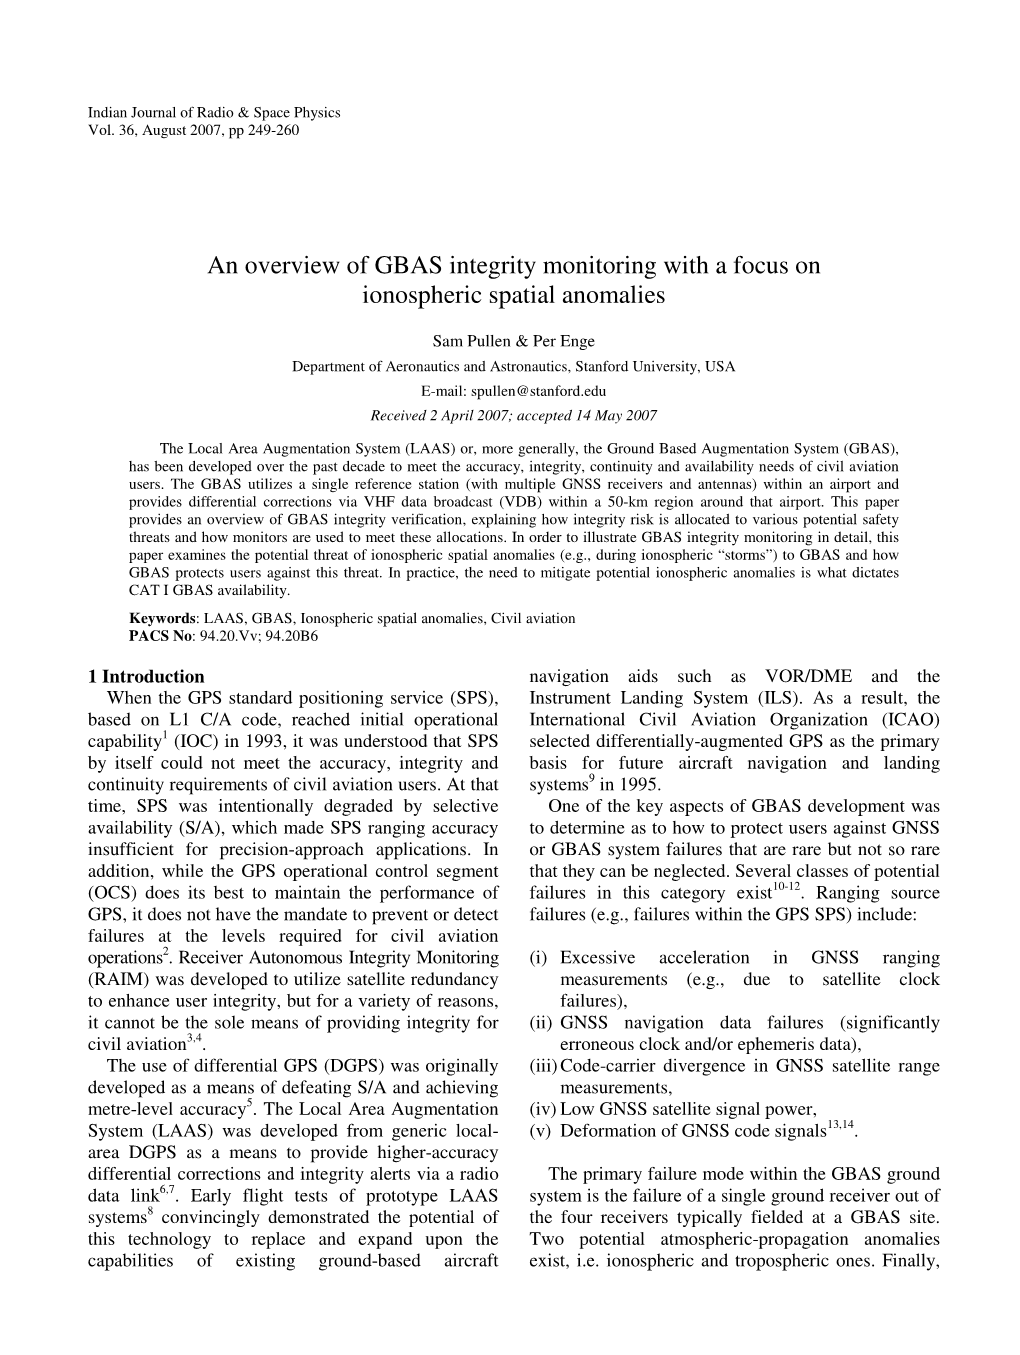 An Overview of GBAS Integrity Monitoring with a Focus on Ionospheric Spatial Anomalies